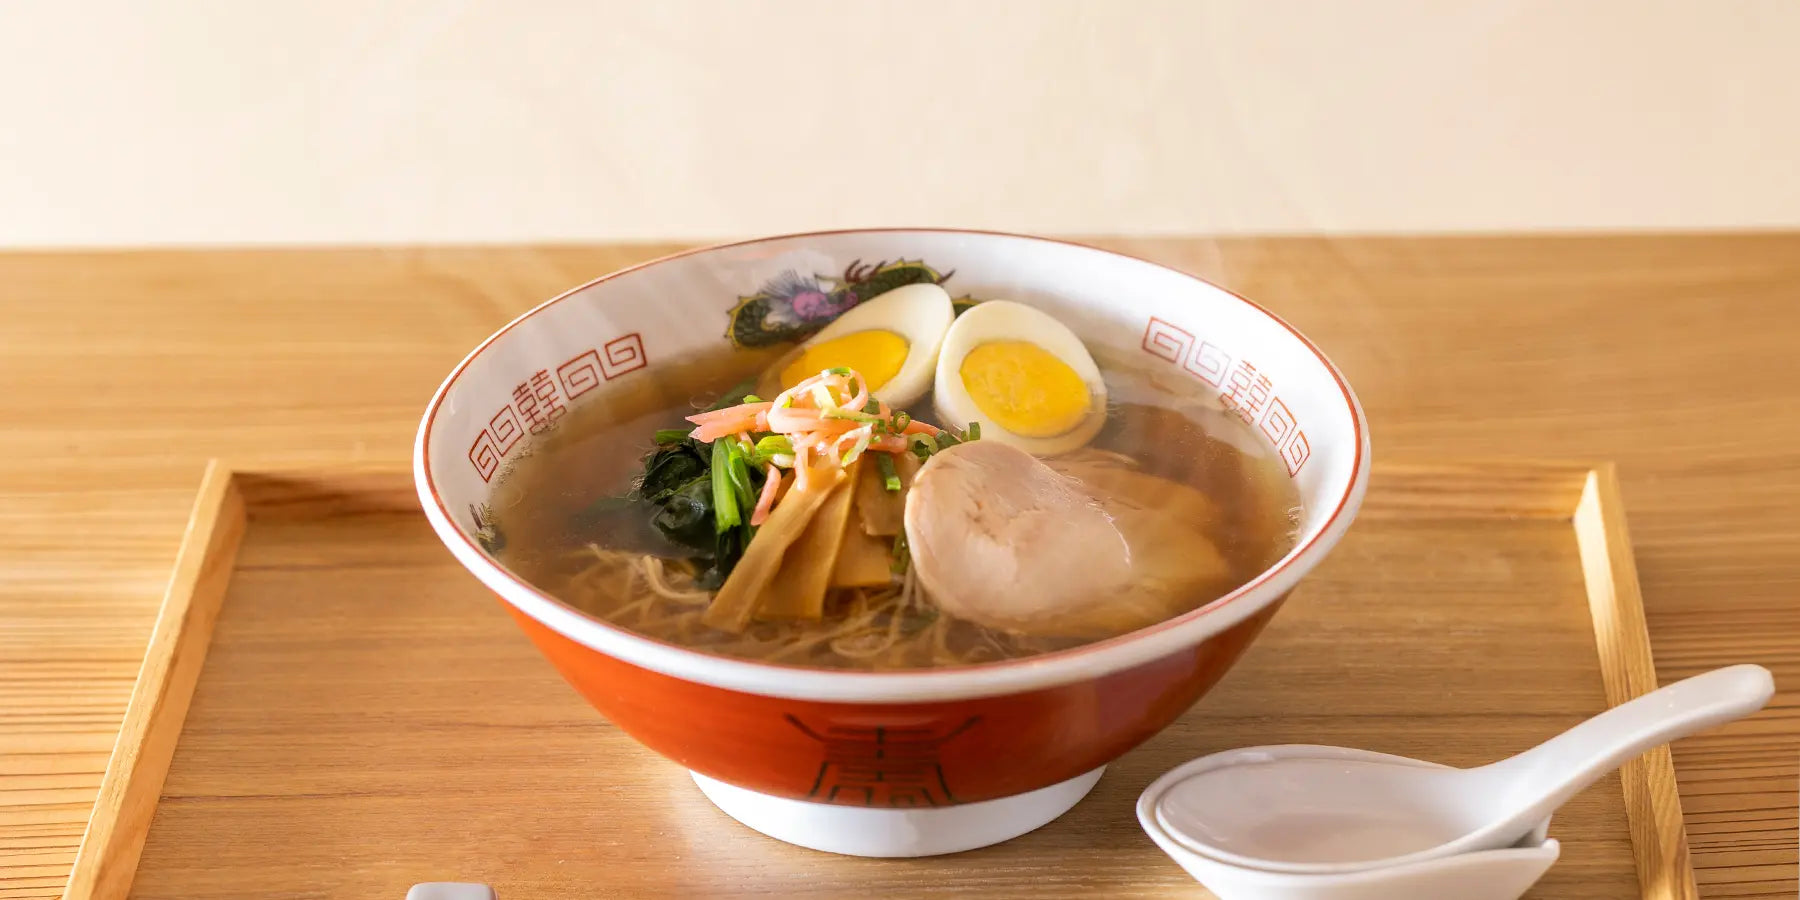 Discover our great selection of Noodle Bowls at Globalkitchen Japan.